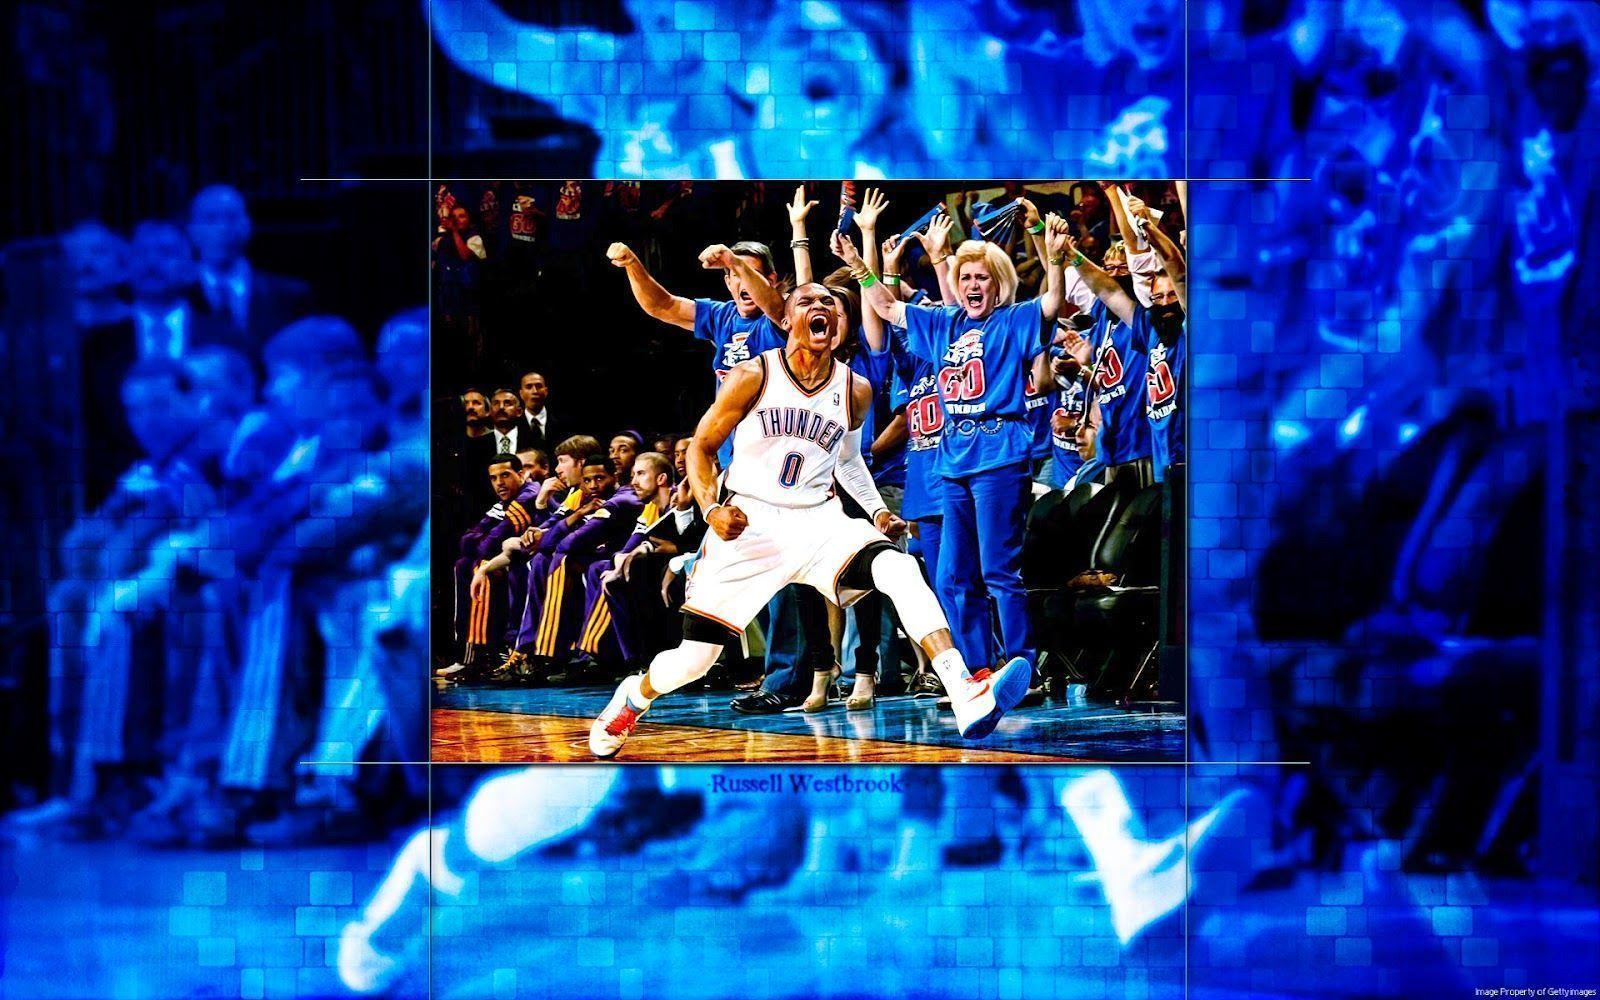 Basketball Wallpaper. Kevin Durant Dunk On Andrew Bynum Wallpaper